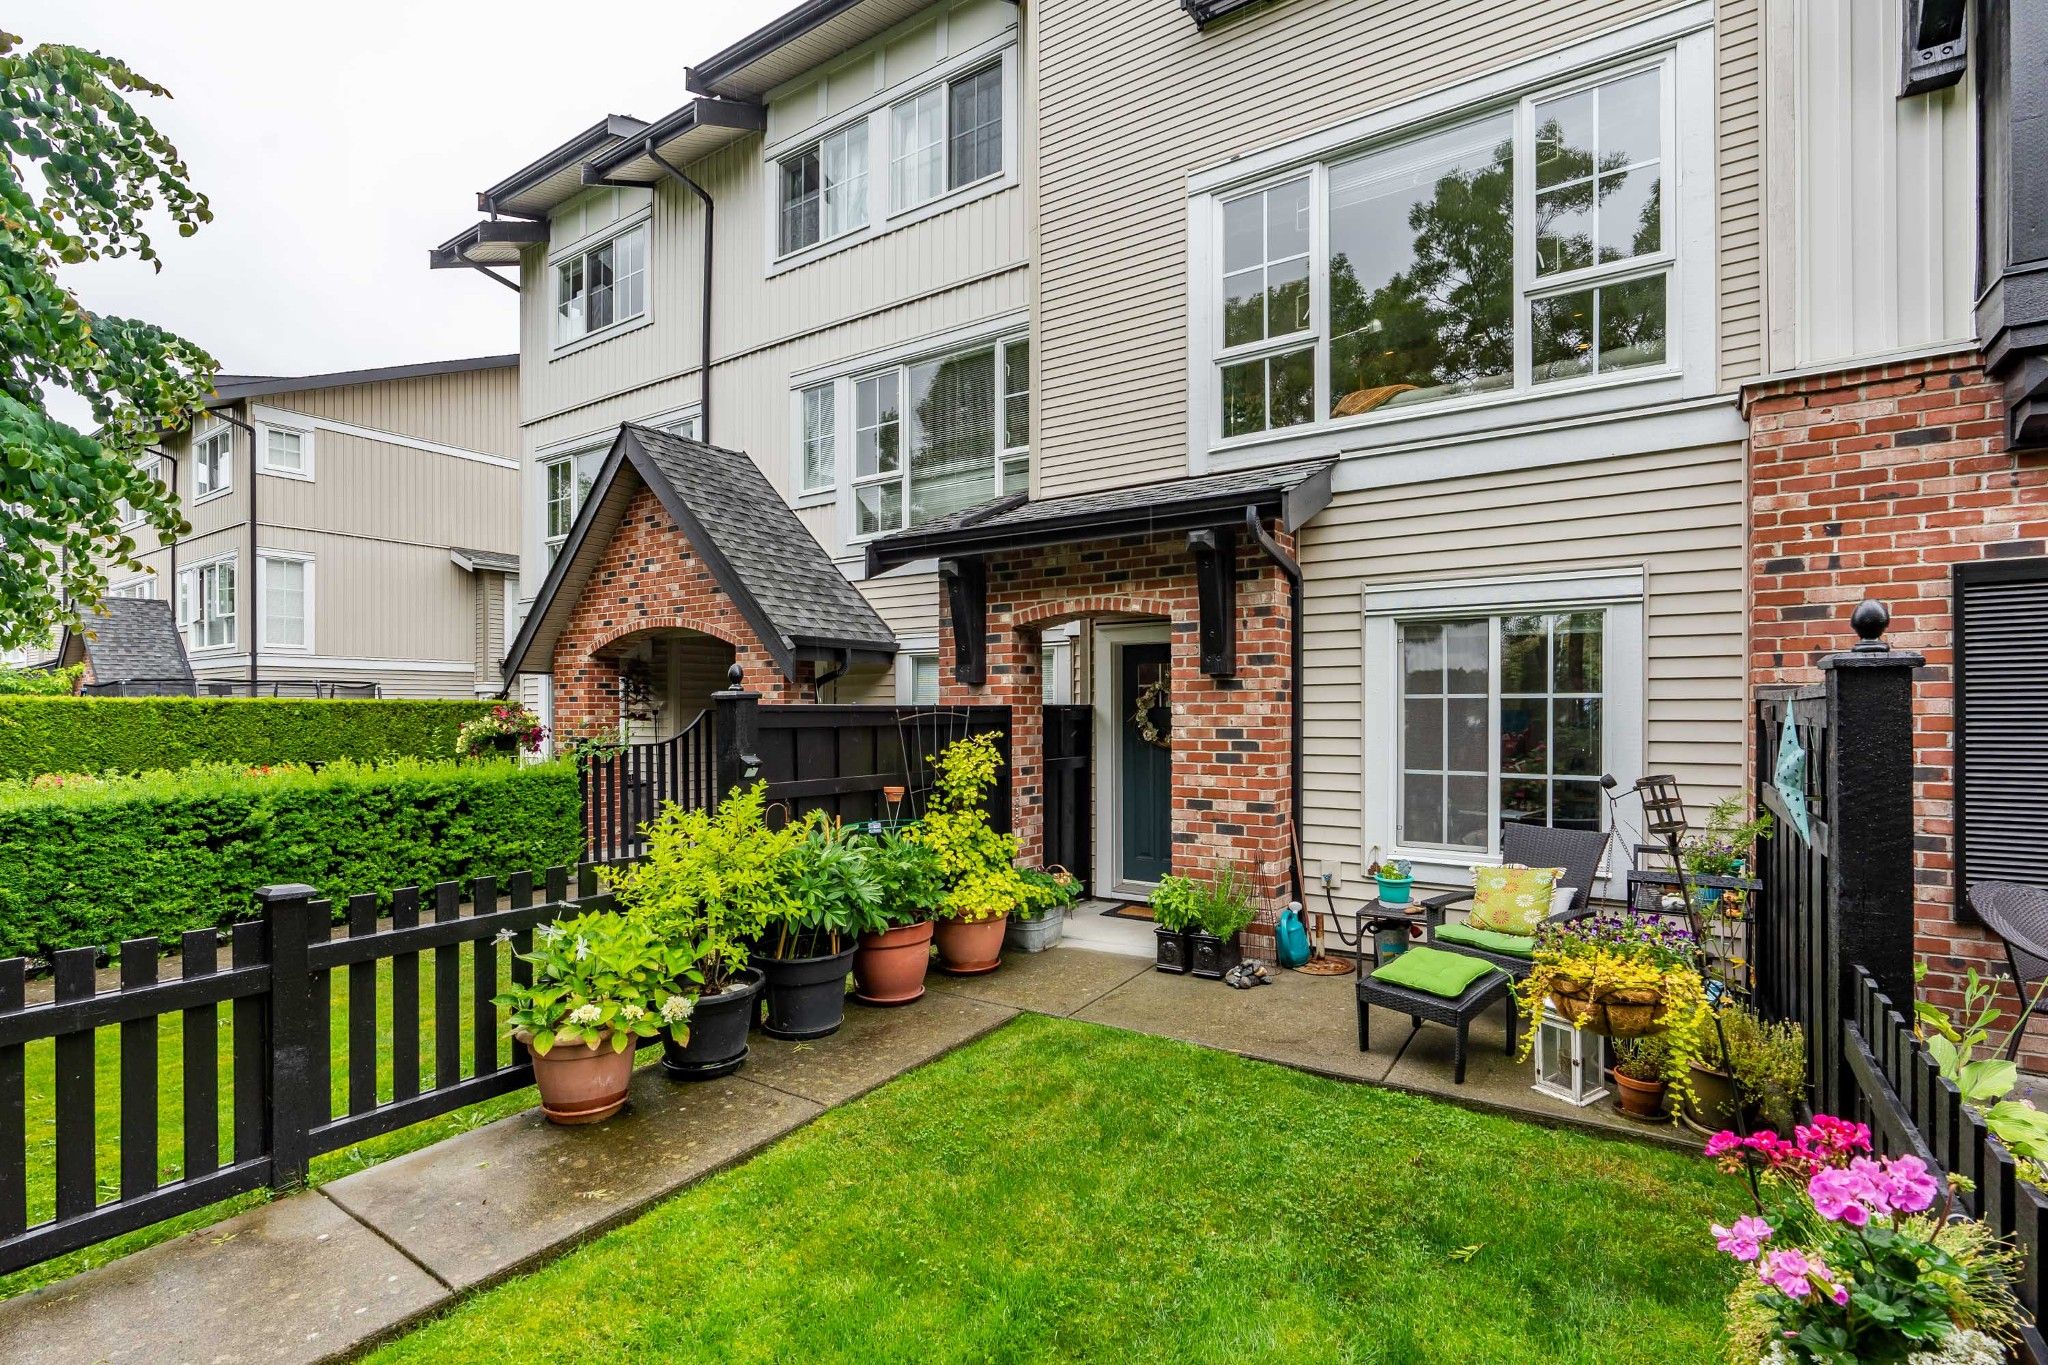 Main Photo: 22 2450 161A Street in Surrey: Grandview Surrey Townhouse for sale (South Surrey White Rock)  : MLS®# R2472218